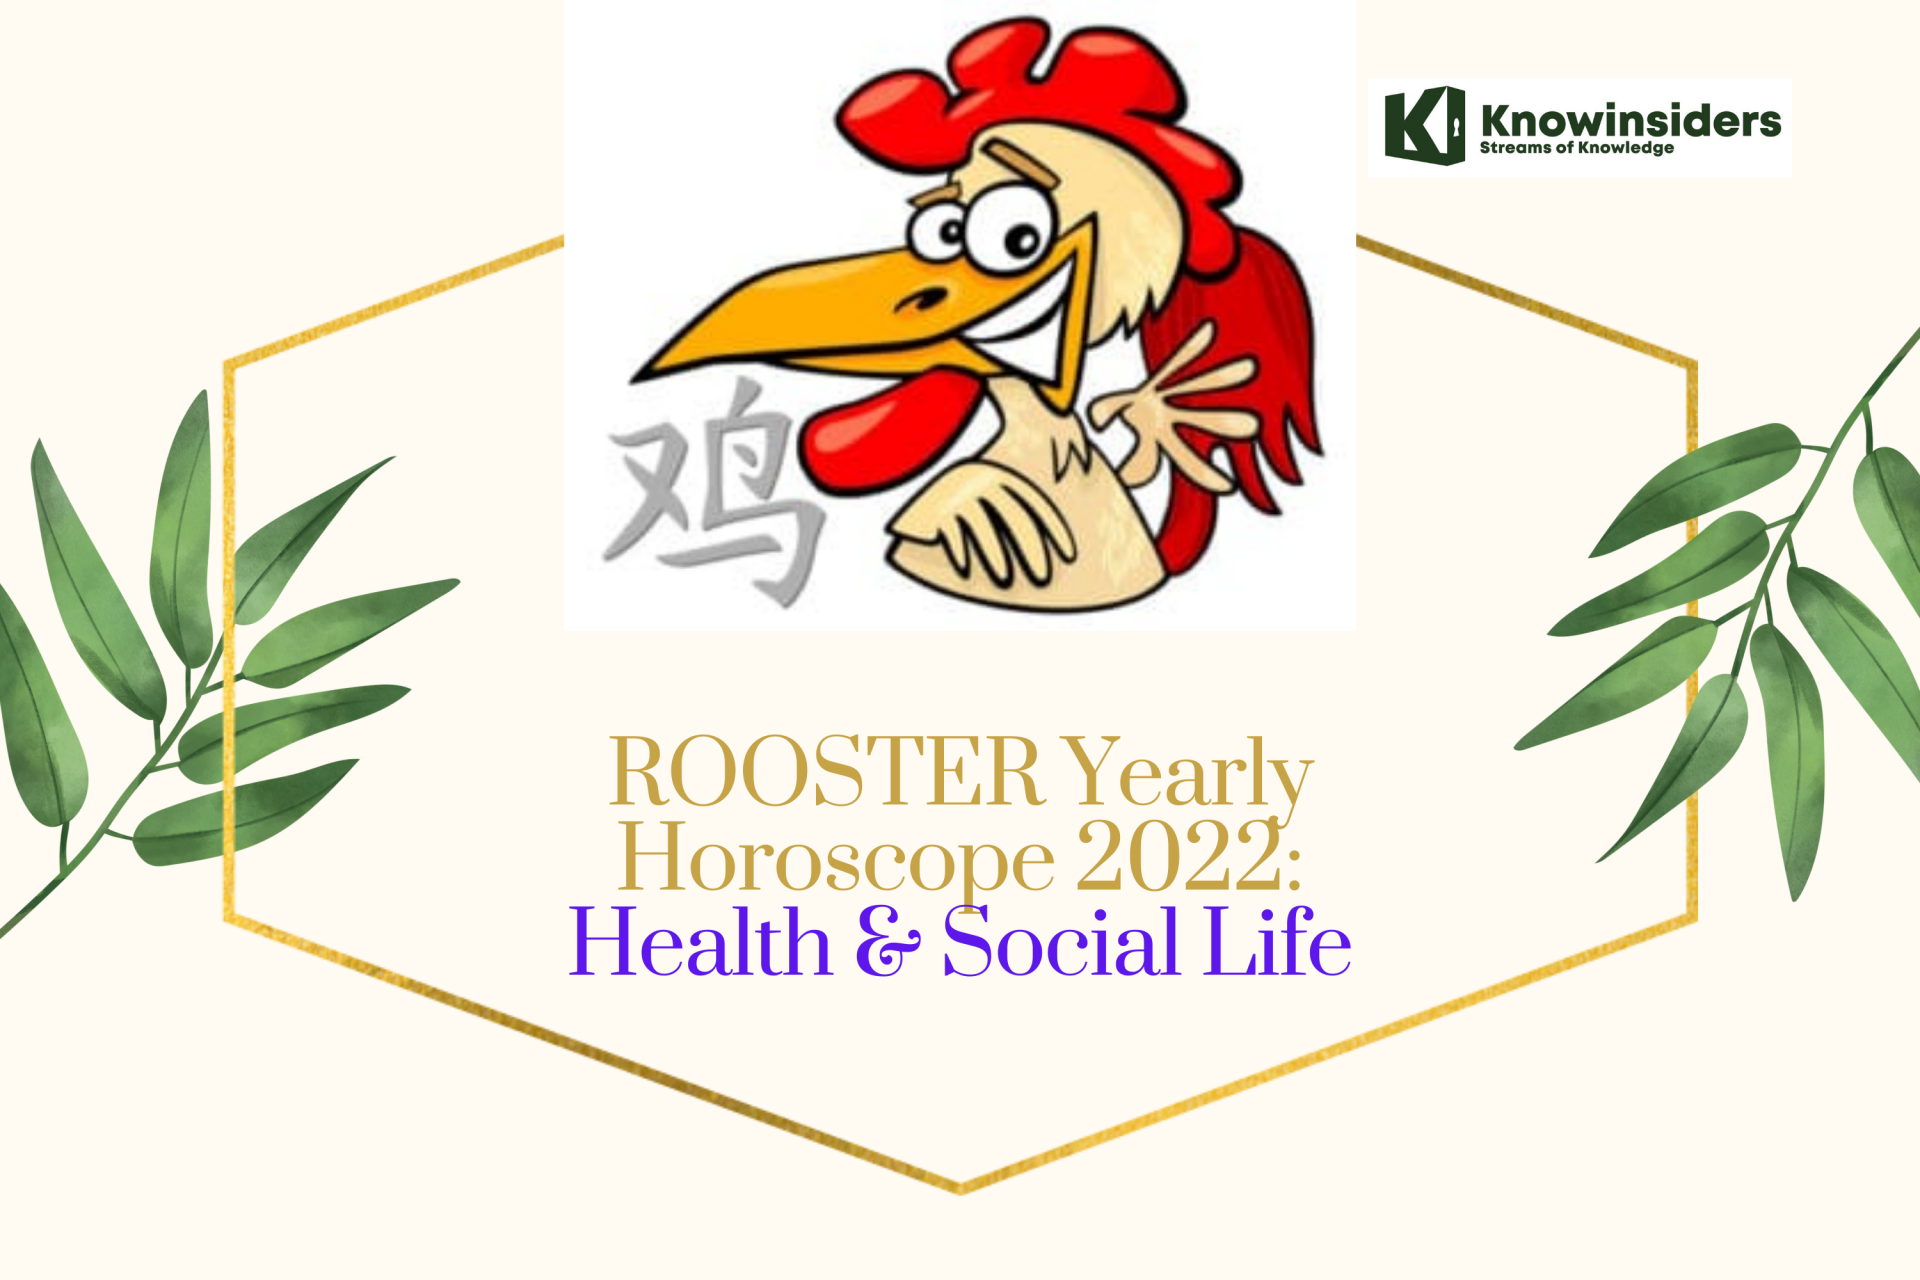 ROOSTER Yearly Horoscope 2022 – Feng Shui Prediction for Health, Social Life